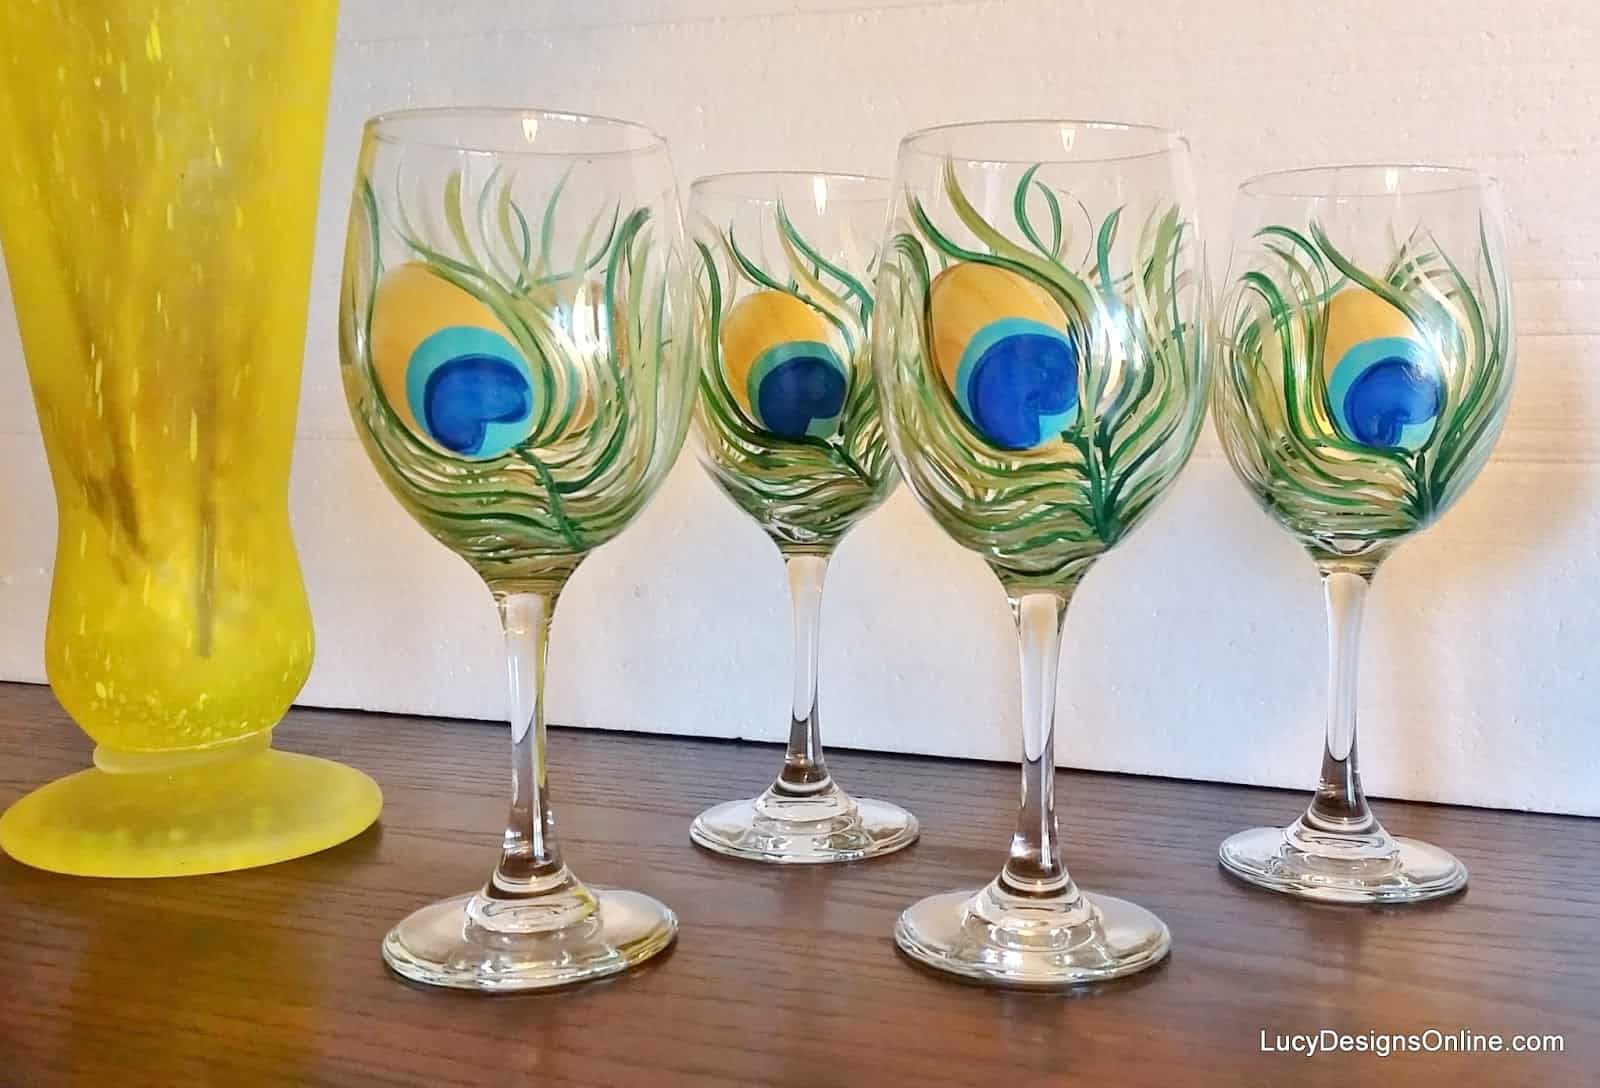 15 Painted Wine Glass Projects To Use